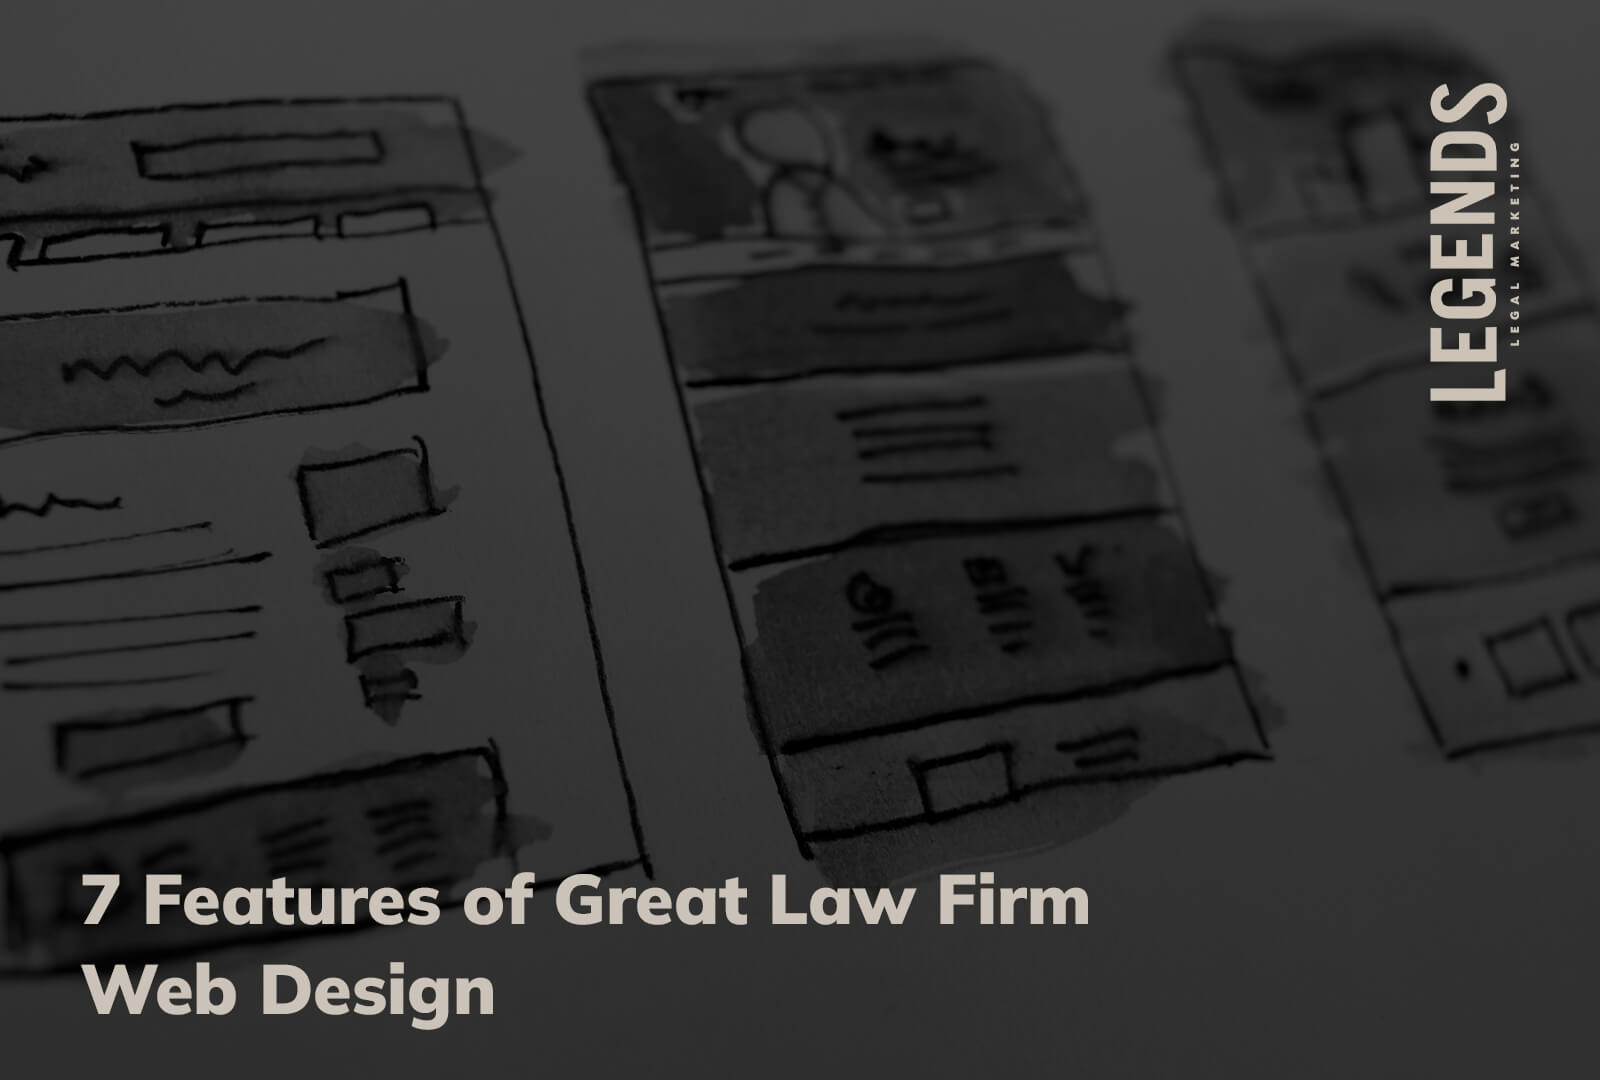 7 Features of Great Law Firm Web Design